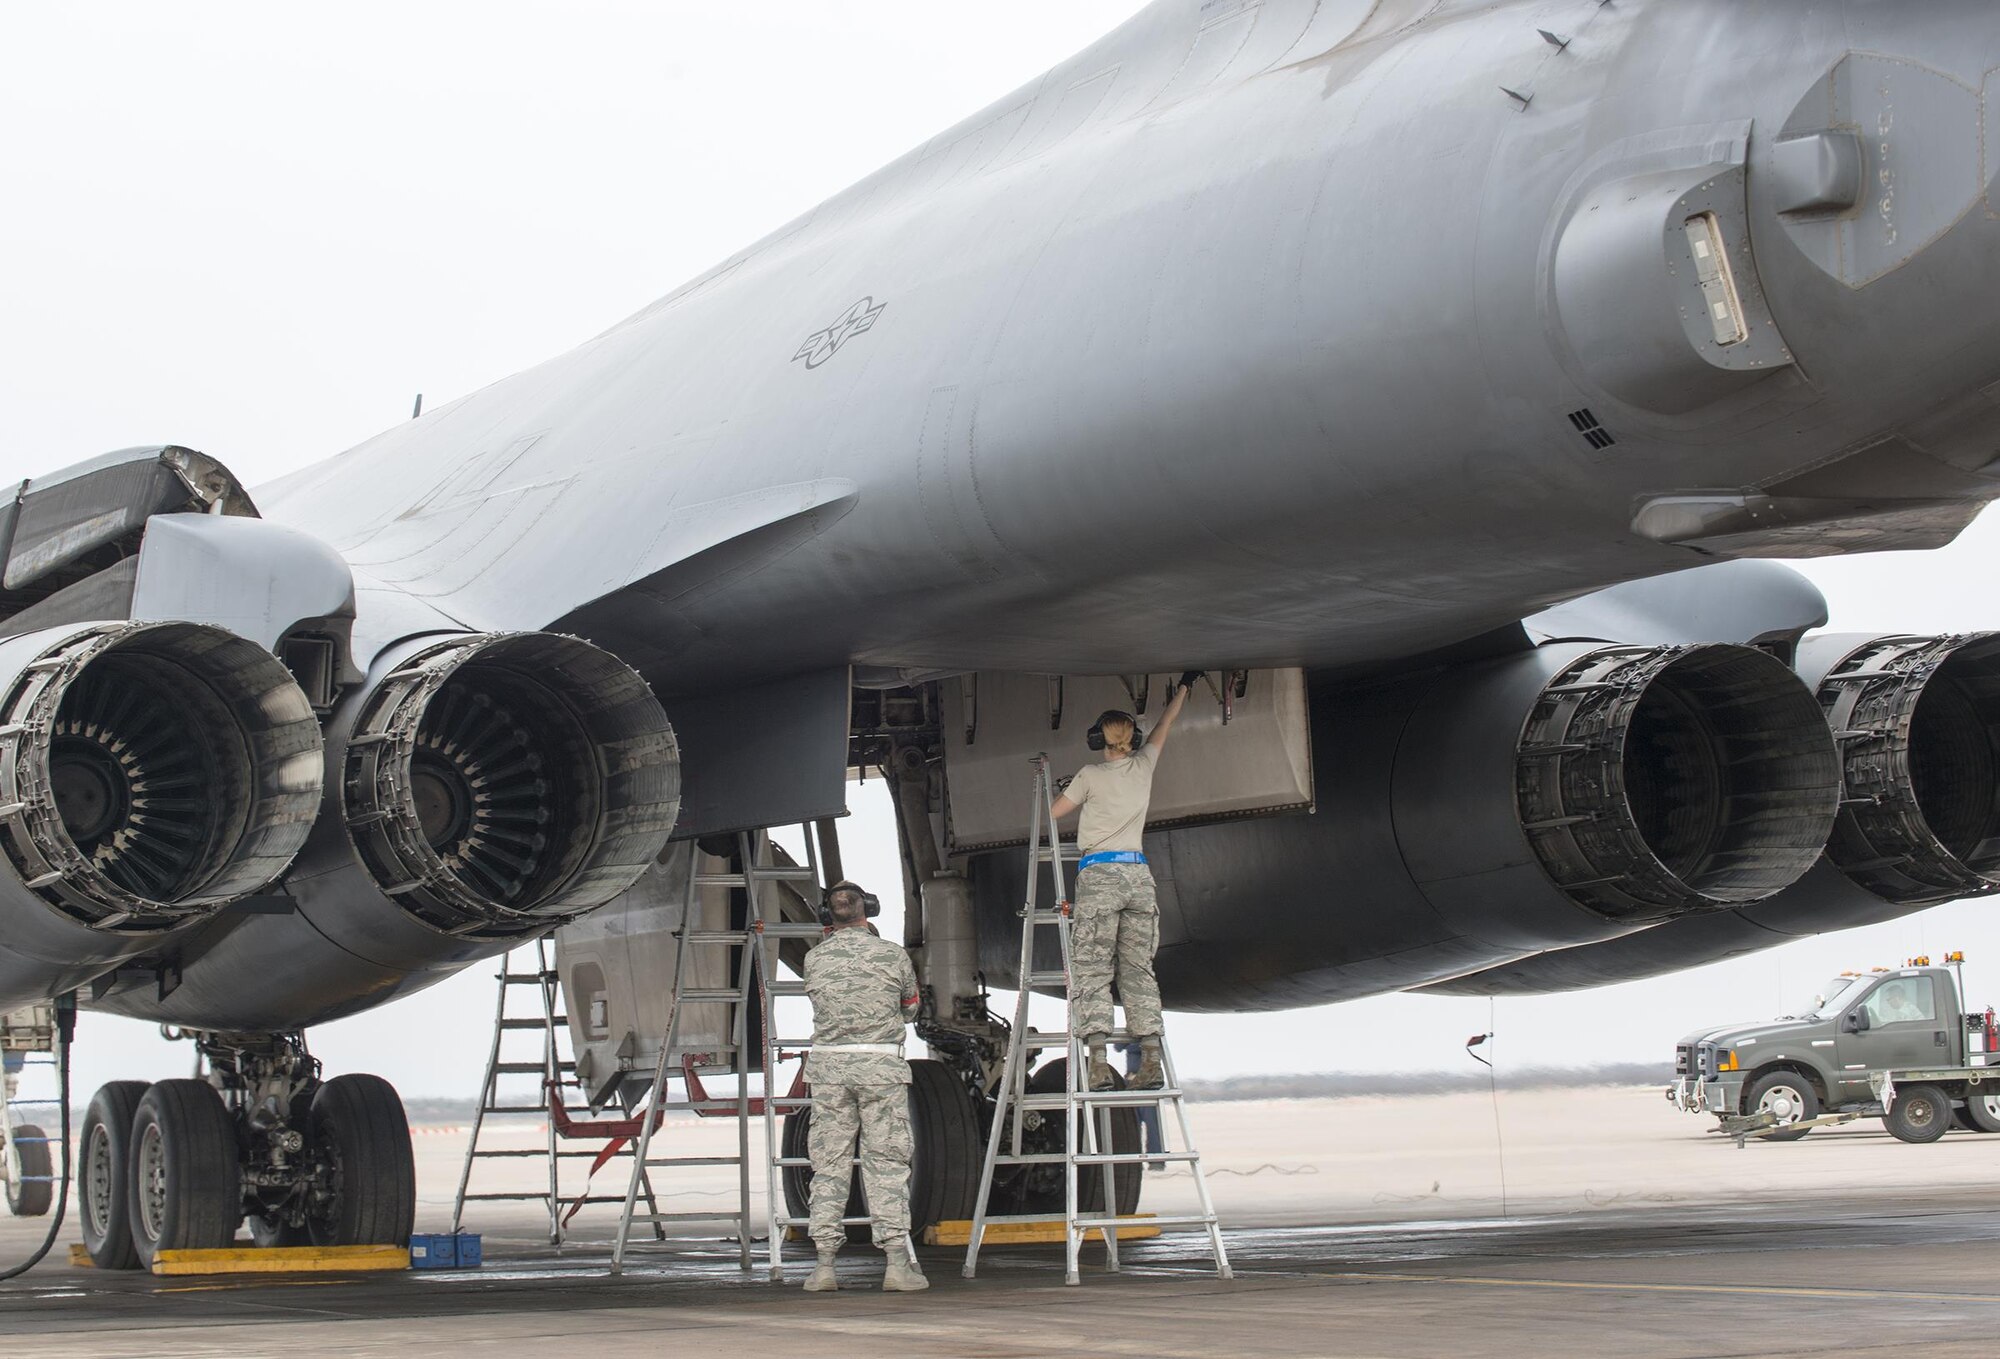 Airmen assigned to the 7th Maintenance Group prep a B-1B Lancer’s bomb bay for a Joint Air-to-Surface Standoff Missile Feb. 21, 2016, at Dyess Air Force Base, Texas, during a B-1 Combat Mission Effectiveness Exercise. The exercise challenged Airmen assigned to the 7th Bomb Wing to prepare six B-1s to launch with weapons and deploy the aircraft and personnel within 48 hours. (U.S. Air Force photo by Airman 1st Class Austin Mayfield/Released)